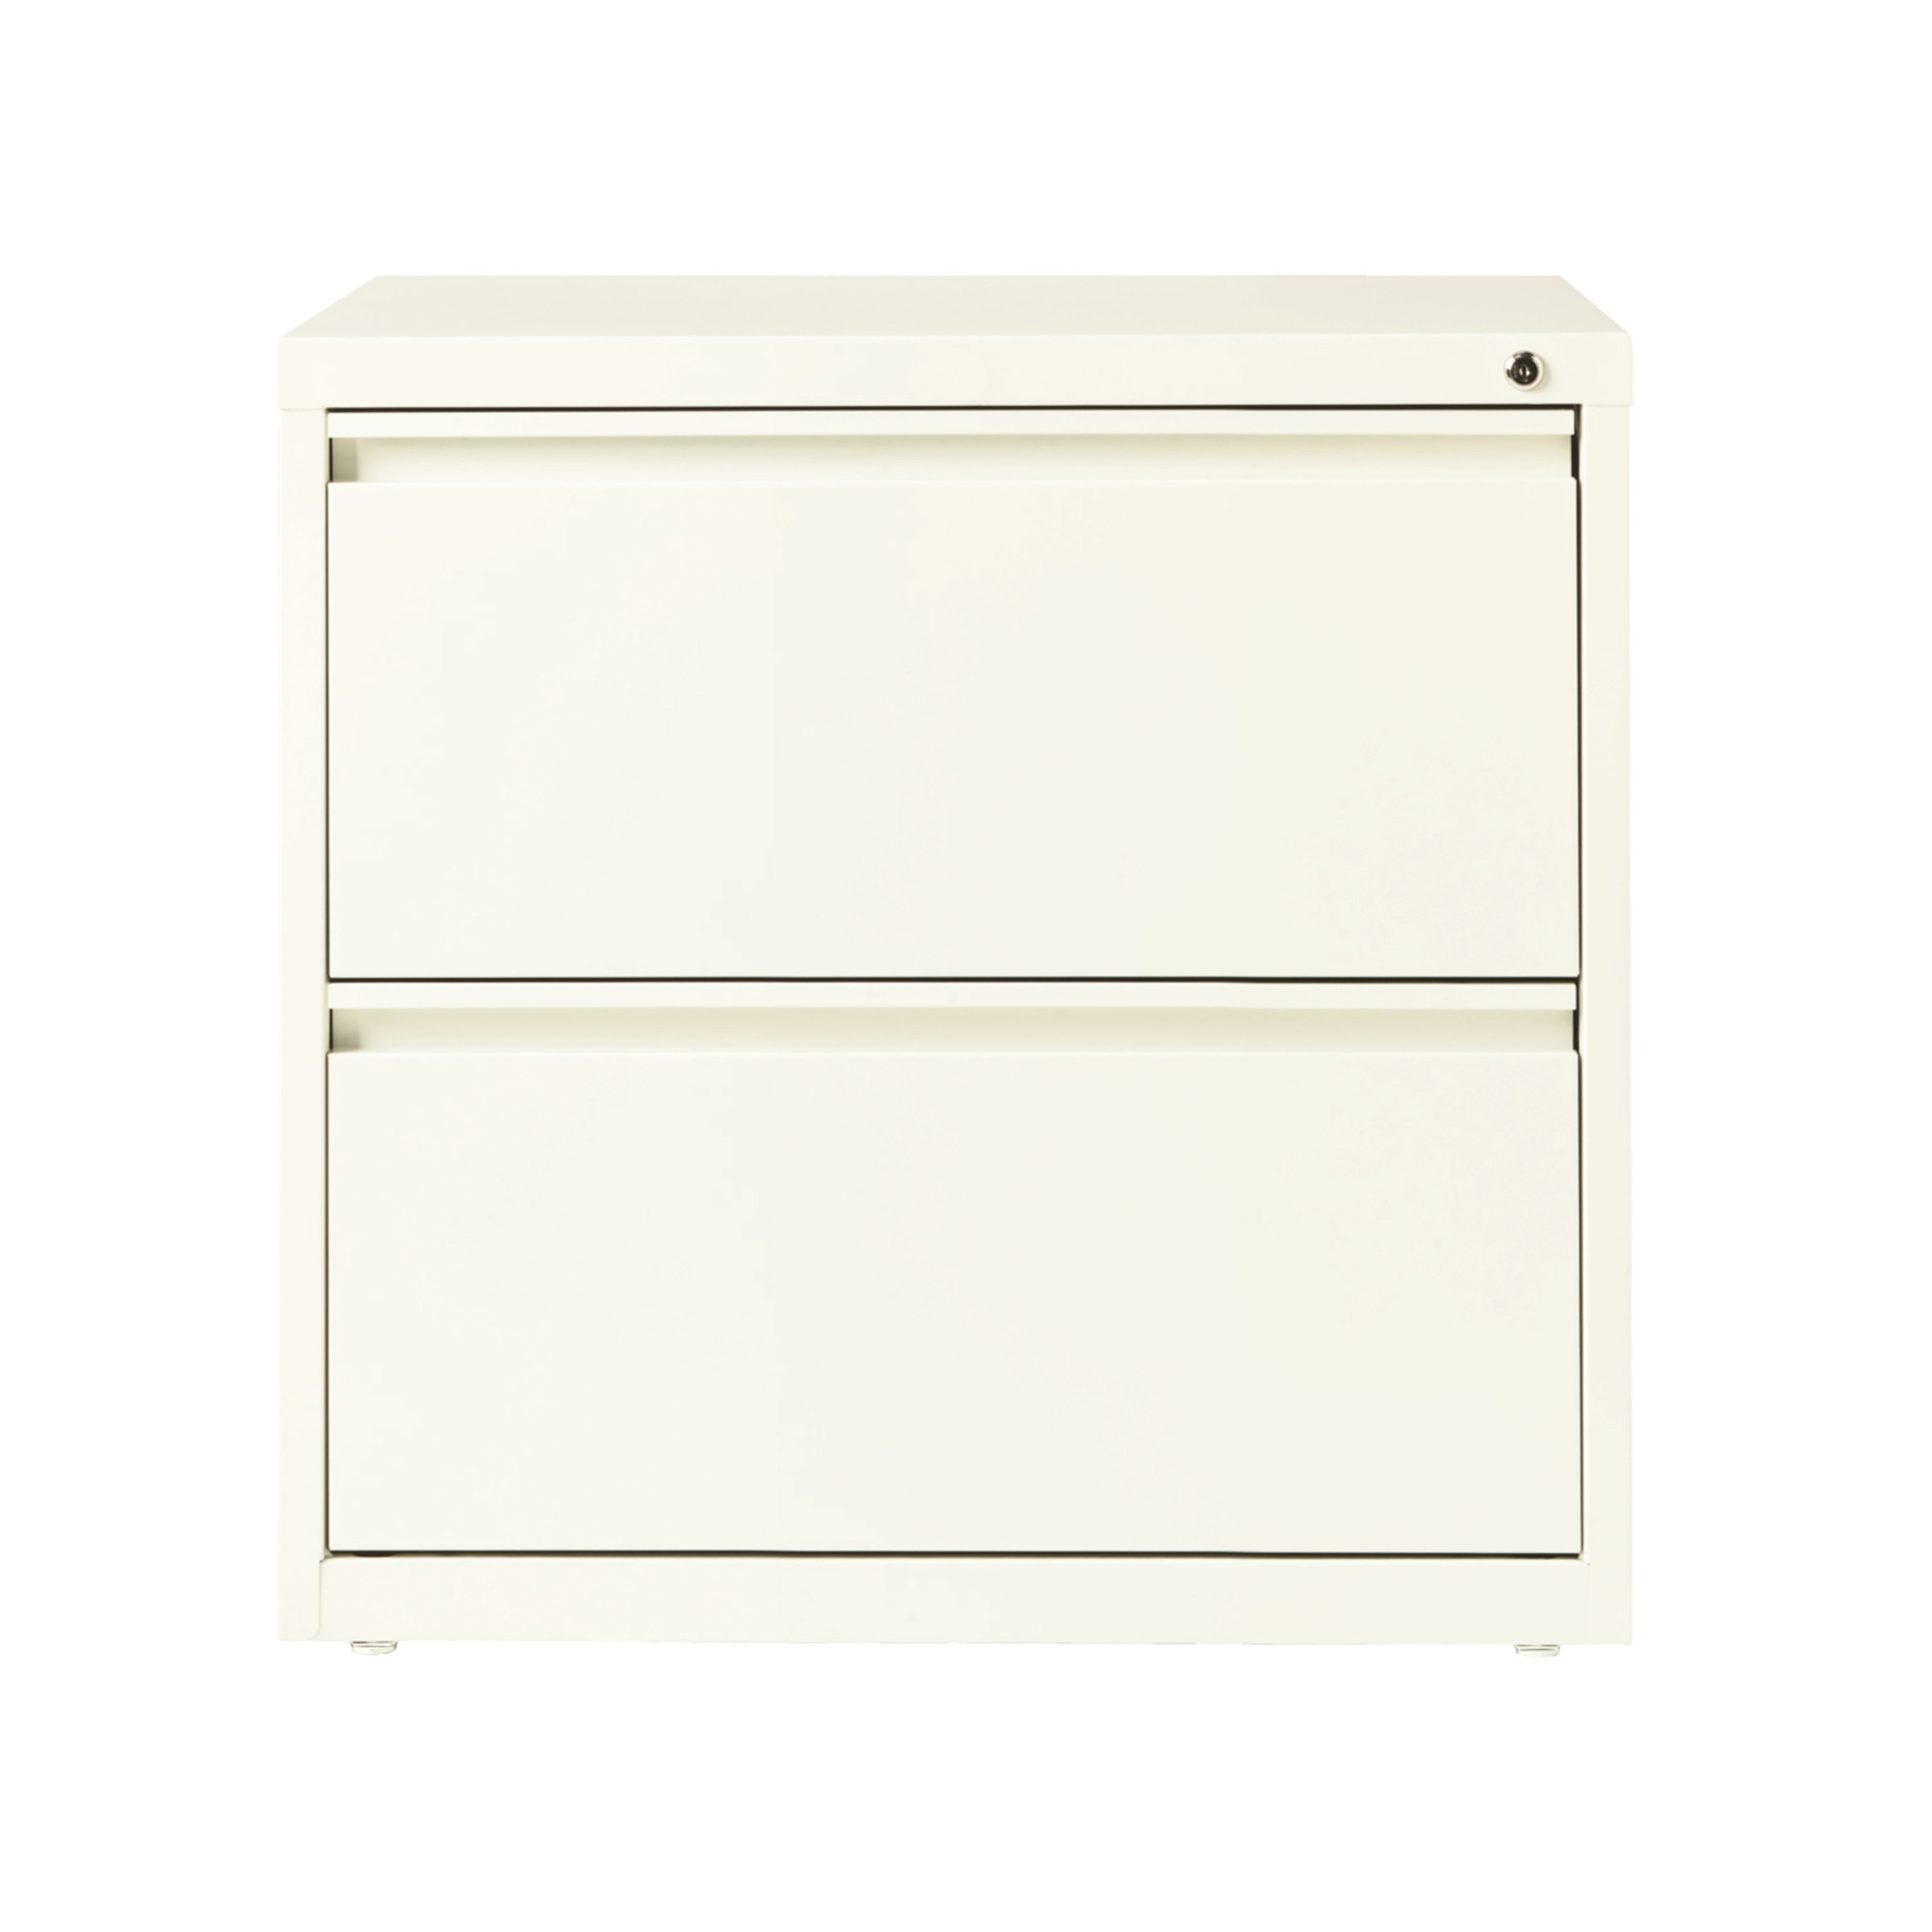 Hirsh Industries, 2 Drawer Lateral File Cabinet, Width 30 in, Depth 18.625 in, Height 28 in, Model 20654